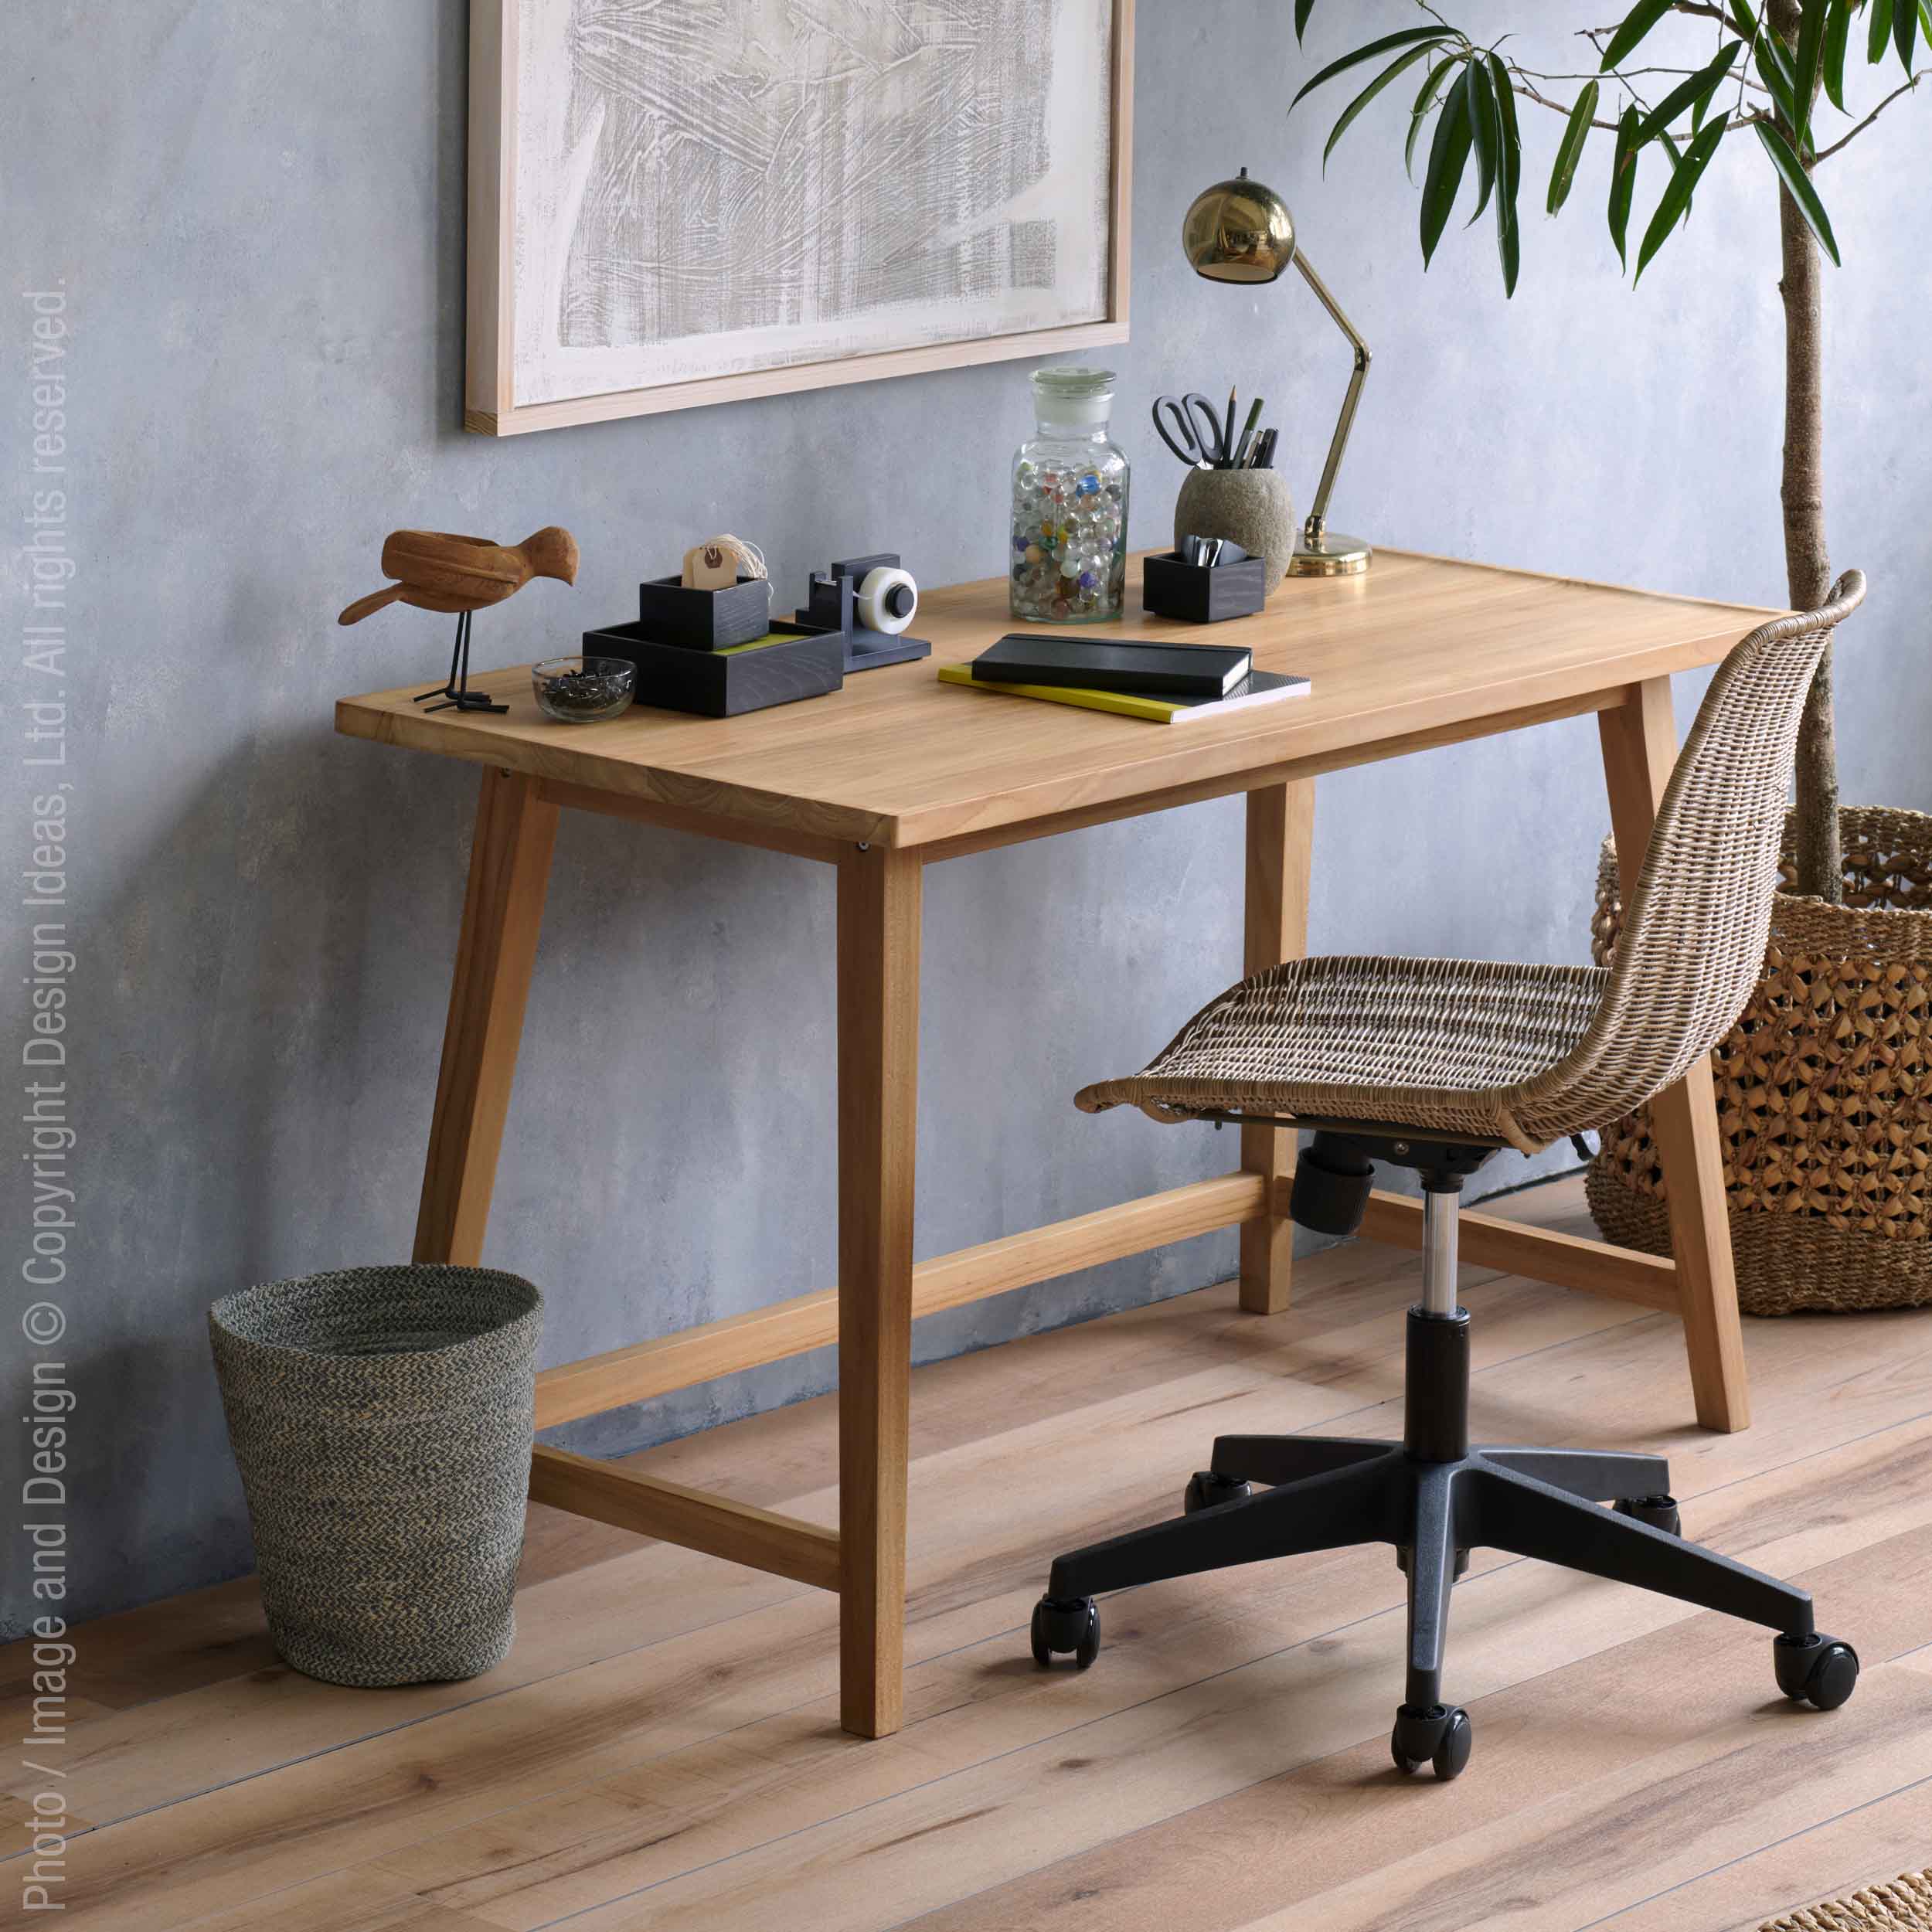 Takara™ desk - Natural | Image 5 | Premium Desk from the Takara collection | made with Teak for long lasting use | texxture